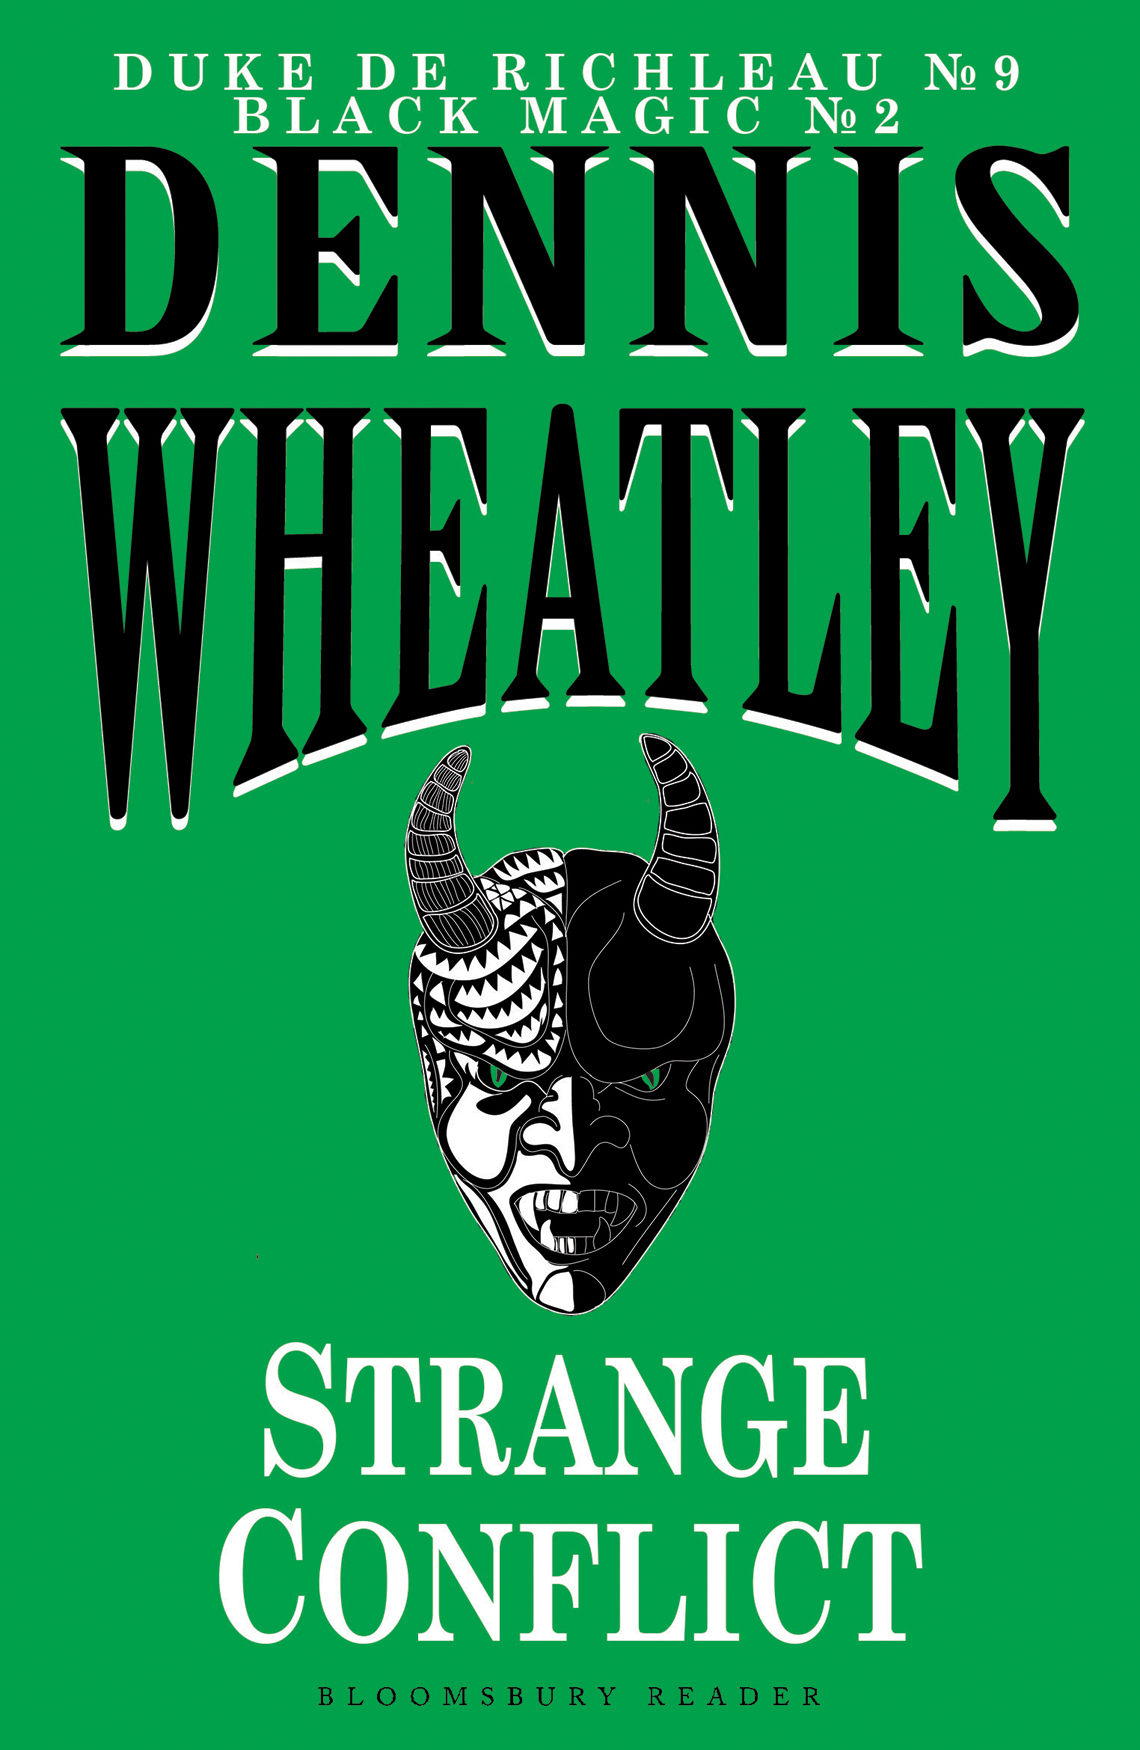 Strange Conflict (2013) by Dennis Wheatley